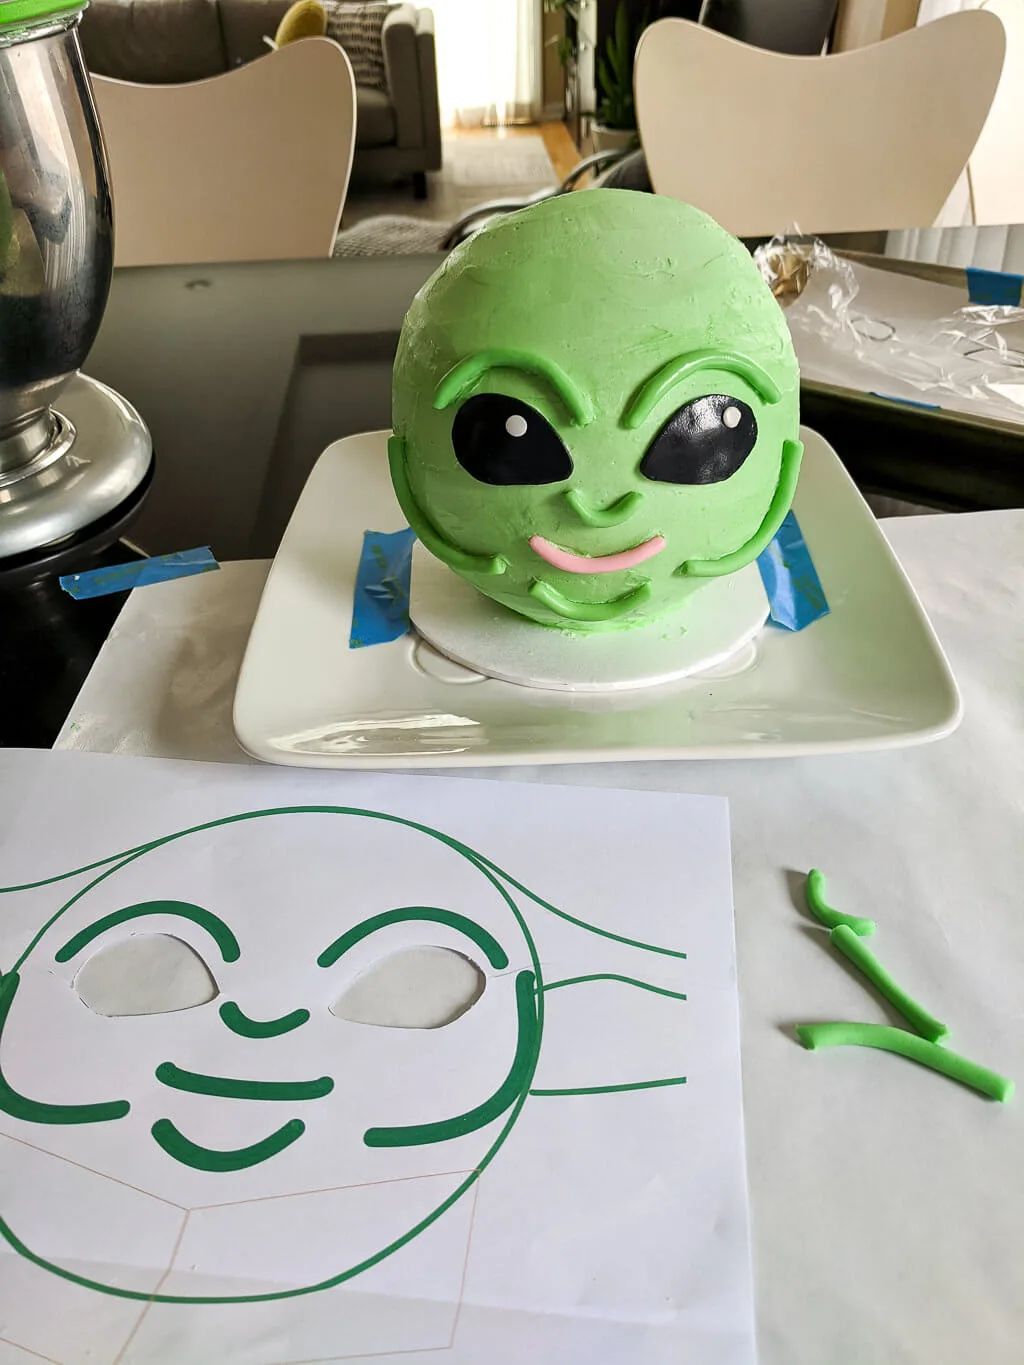 DIY Baby Yoda cake with buttercream icing and fondant accents